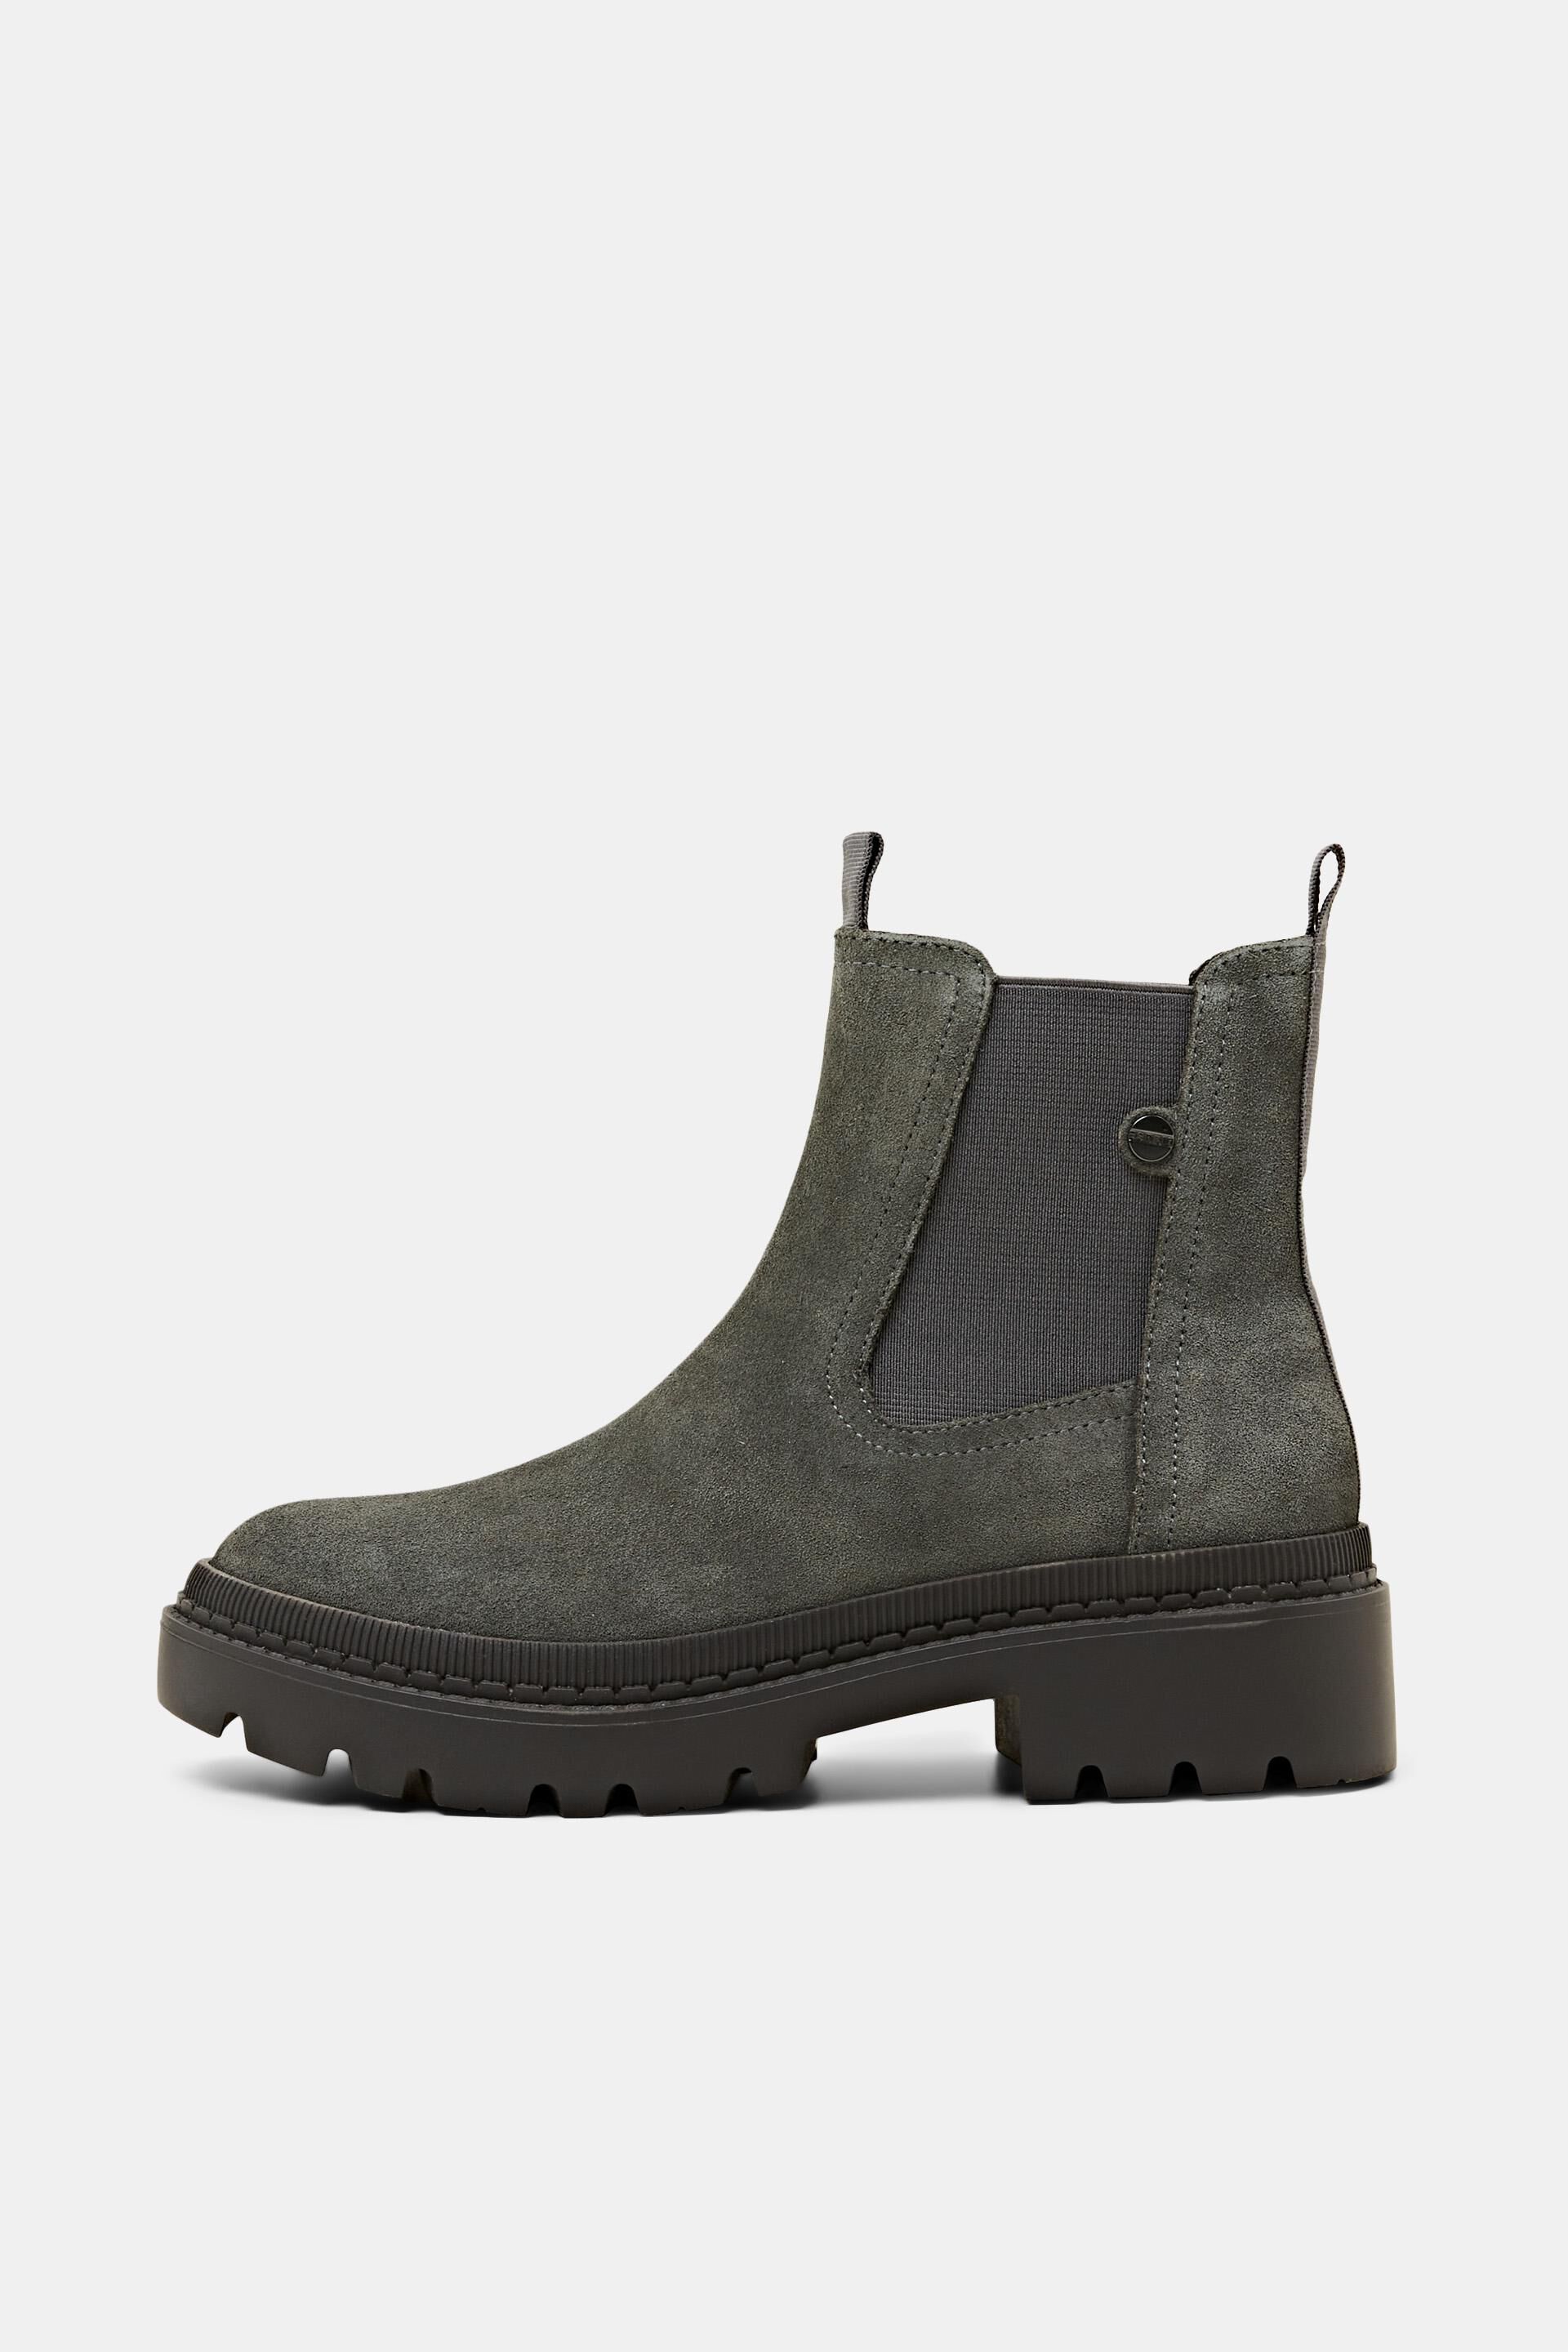 Esprit boots Real suede